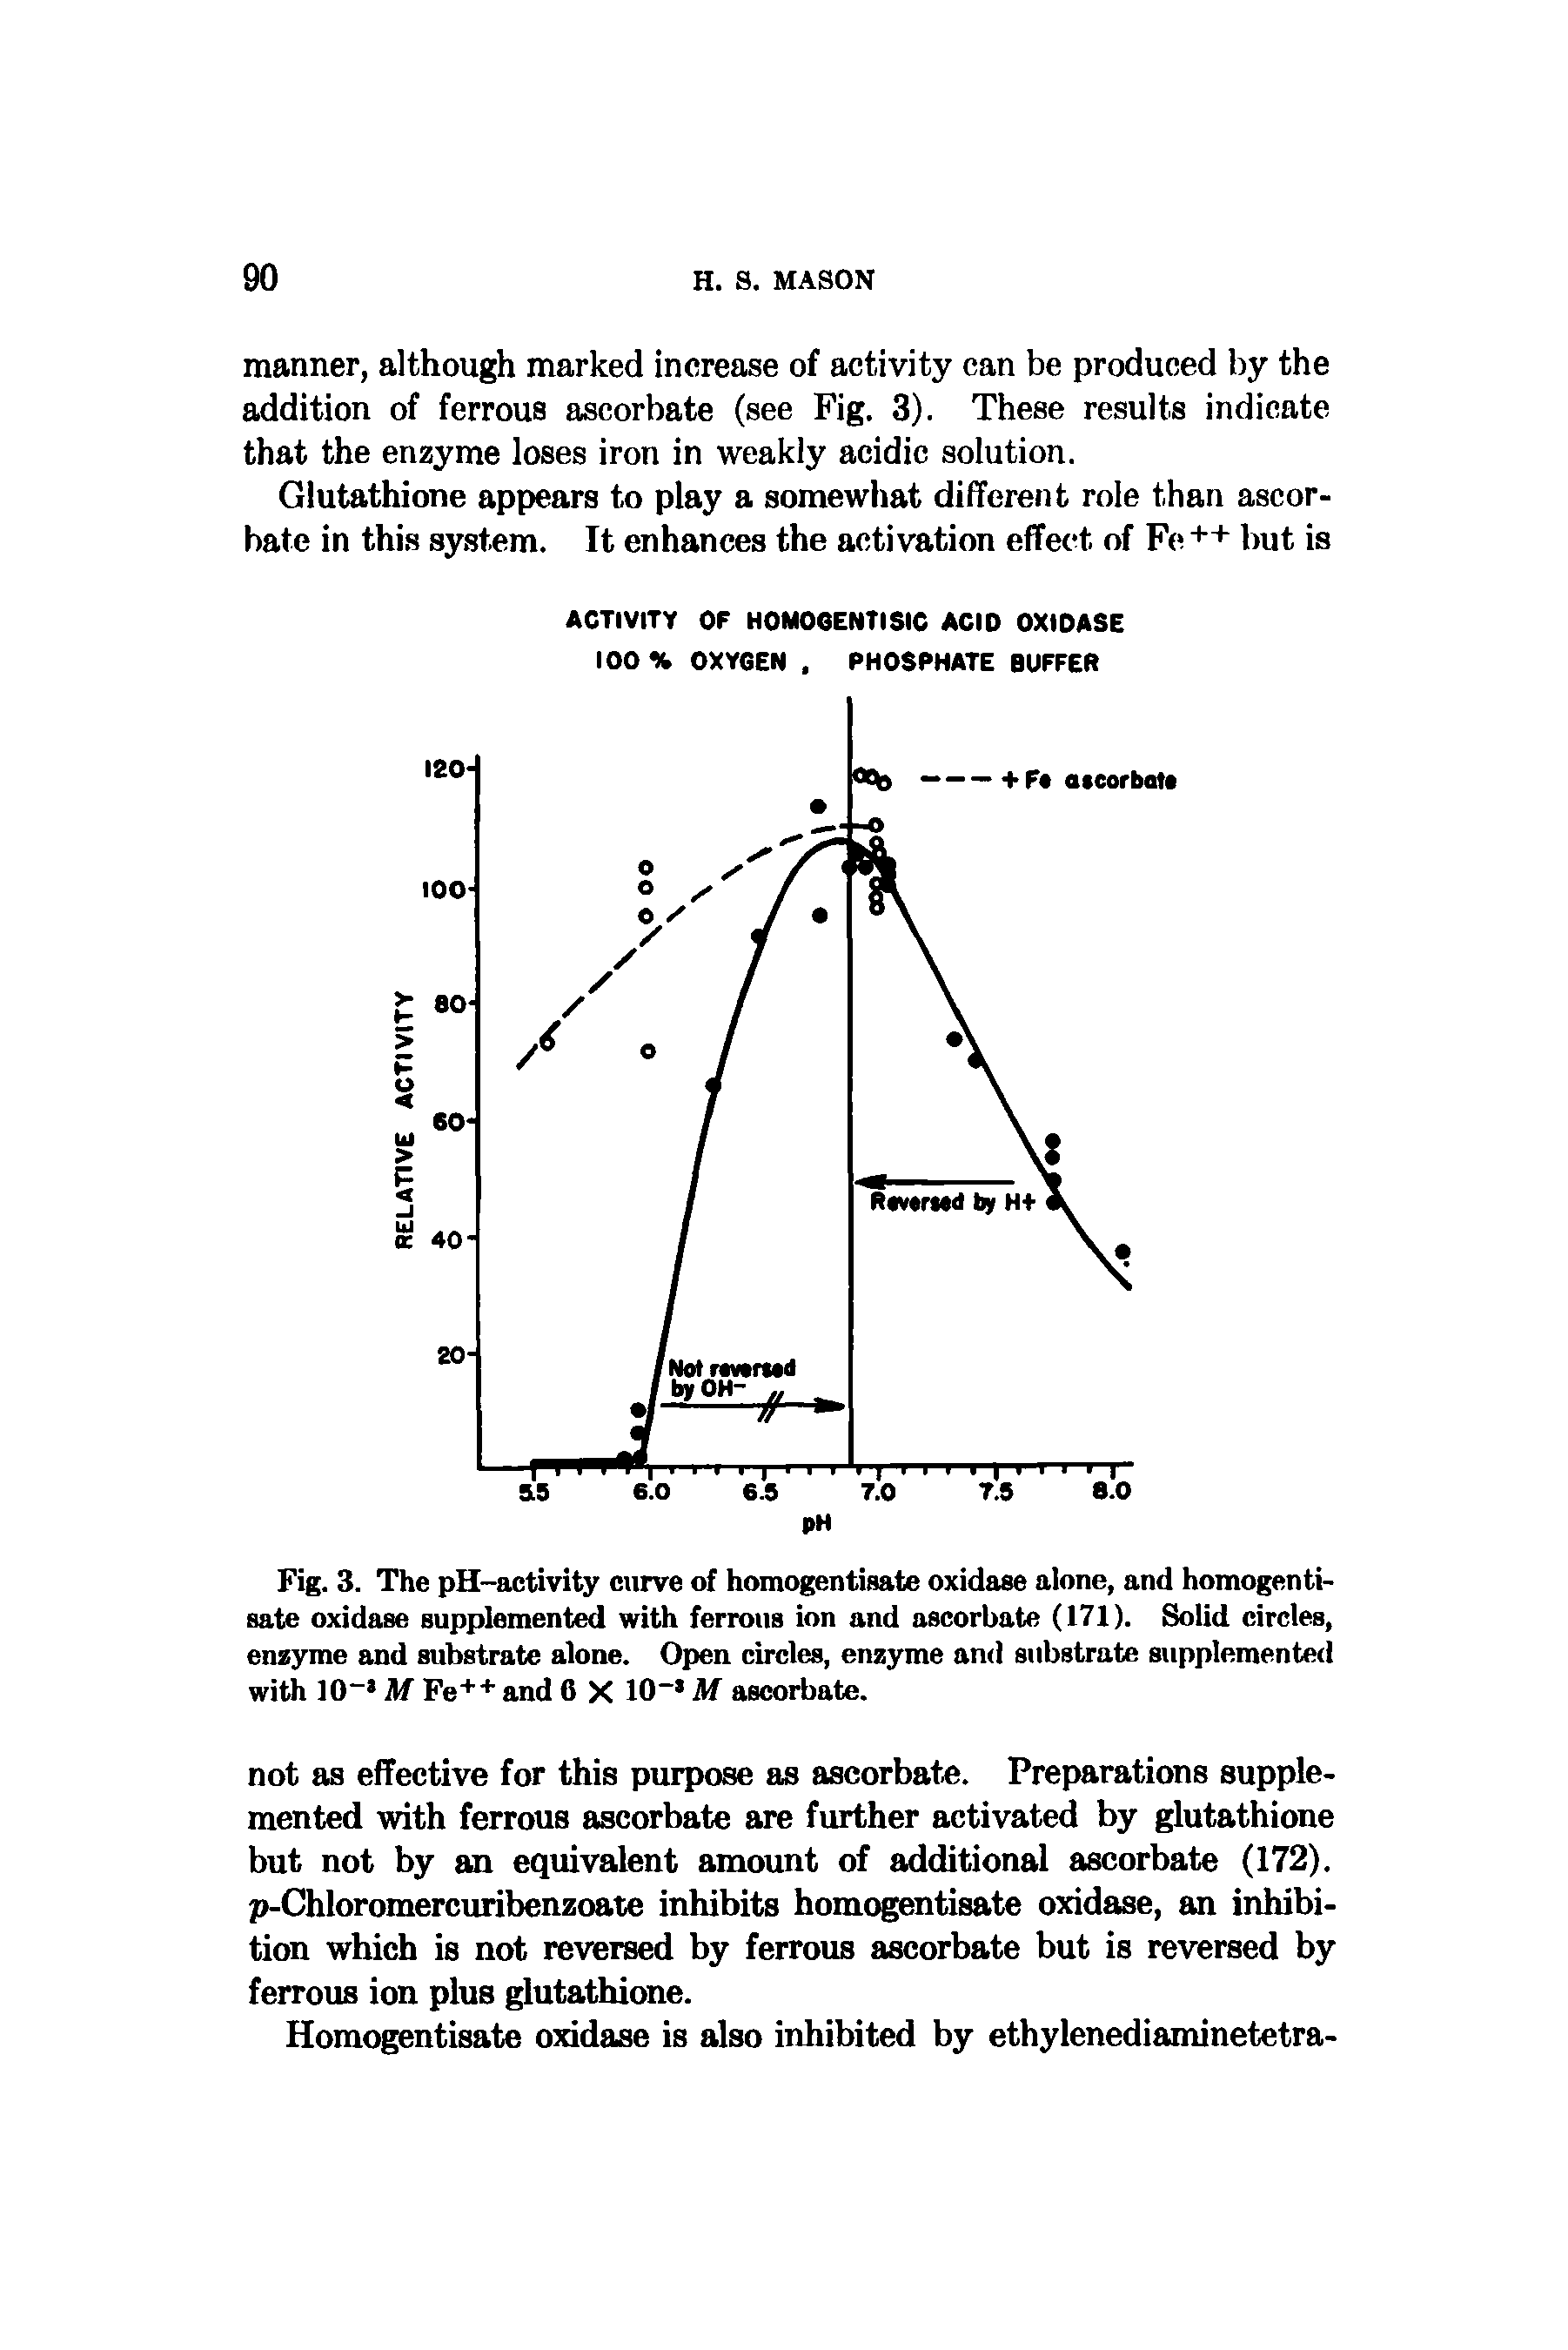 Fig. 3. The pH-activiiy curve of homogentisate oxidase alone, and homogenti-sate oxidase supplemented with ferrous ion and ascorbate (171). Solid circles, ensyme and substrate alone. Open circles, enzyme and substrate supplemented with 10 M Fe" and 6 X 10 Af ascorbate.